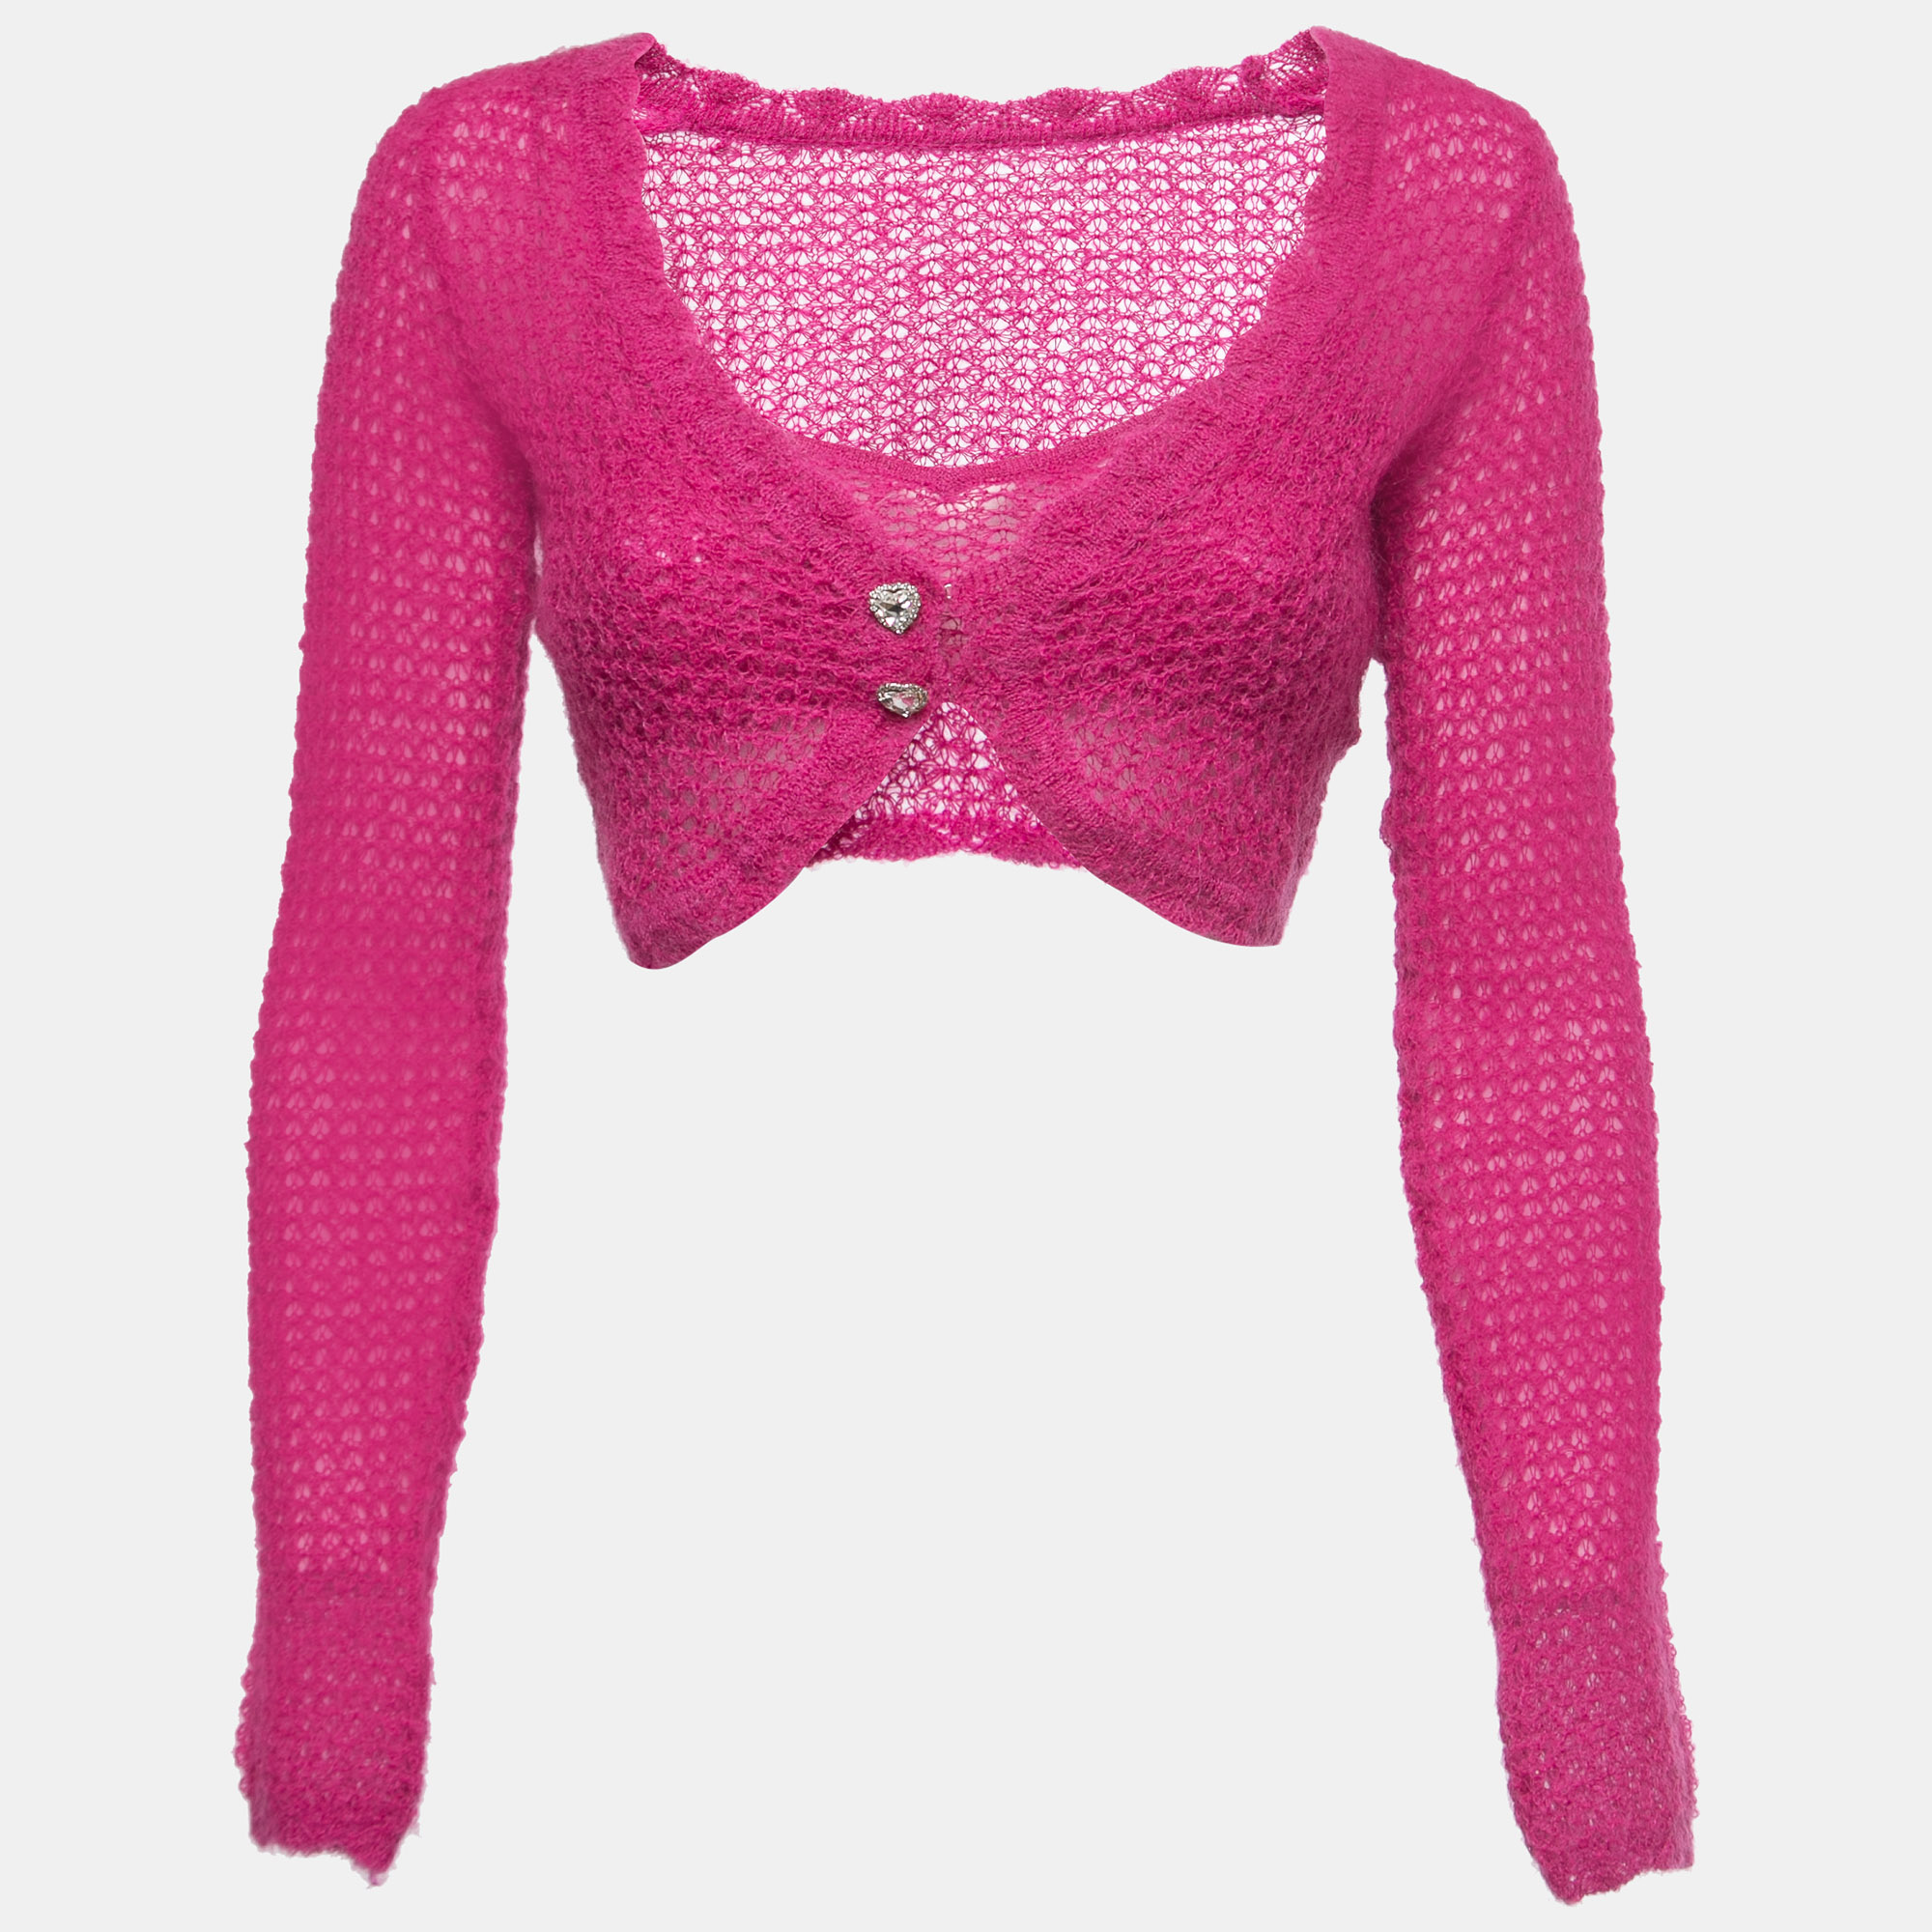 

Nana Jacqueline Hot Pink Crochet Knit Cropped Top and Cardigan Set S